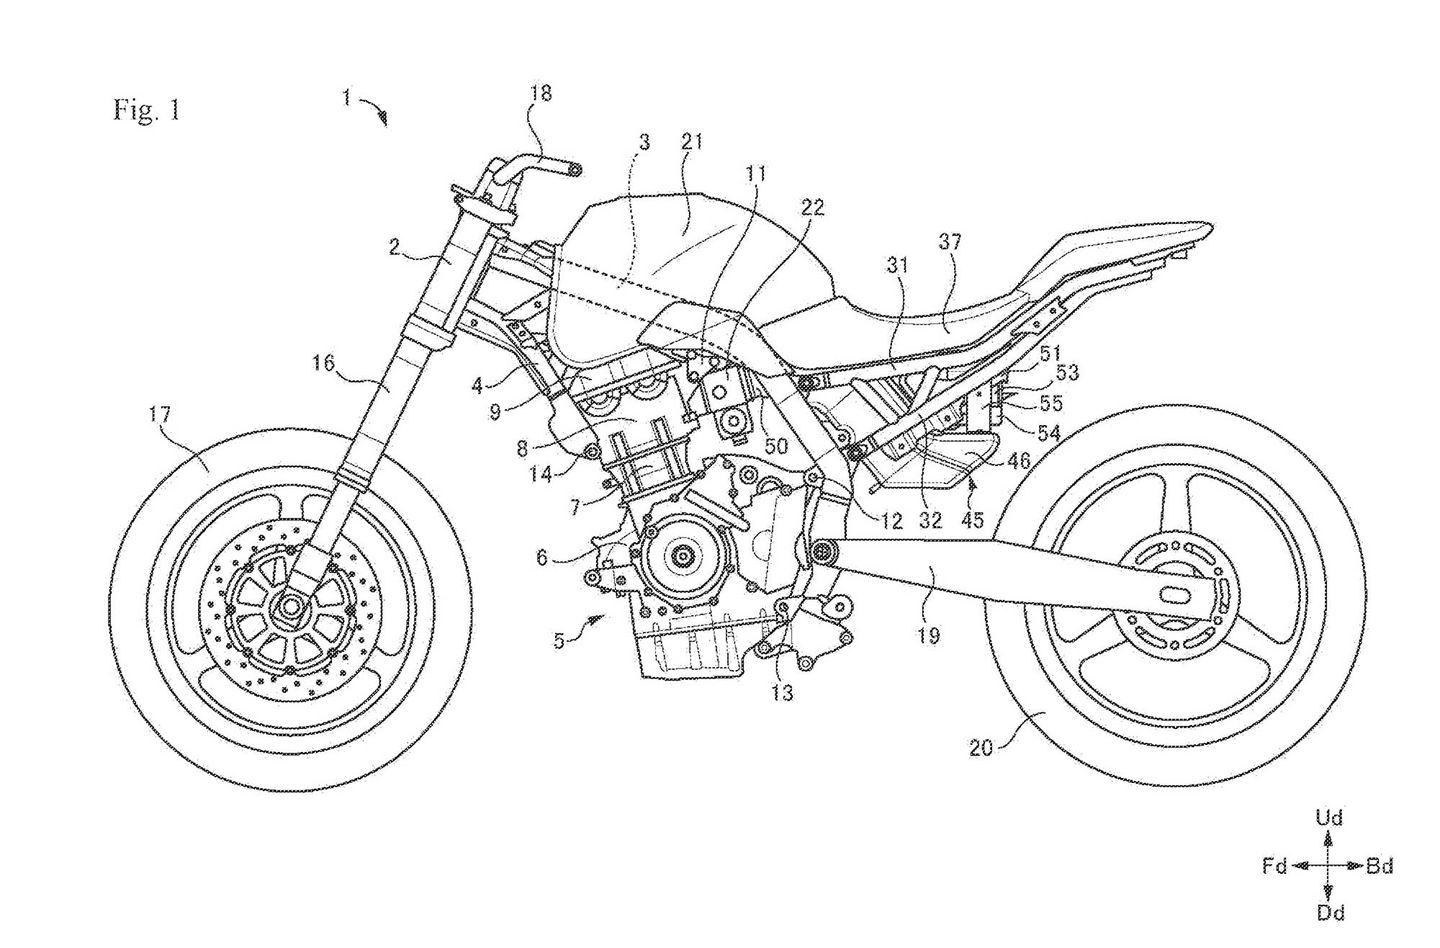 A patent image of the upcoming 700cc parallel-twin engine in a SV650-like motorcycle